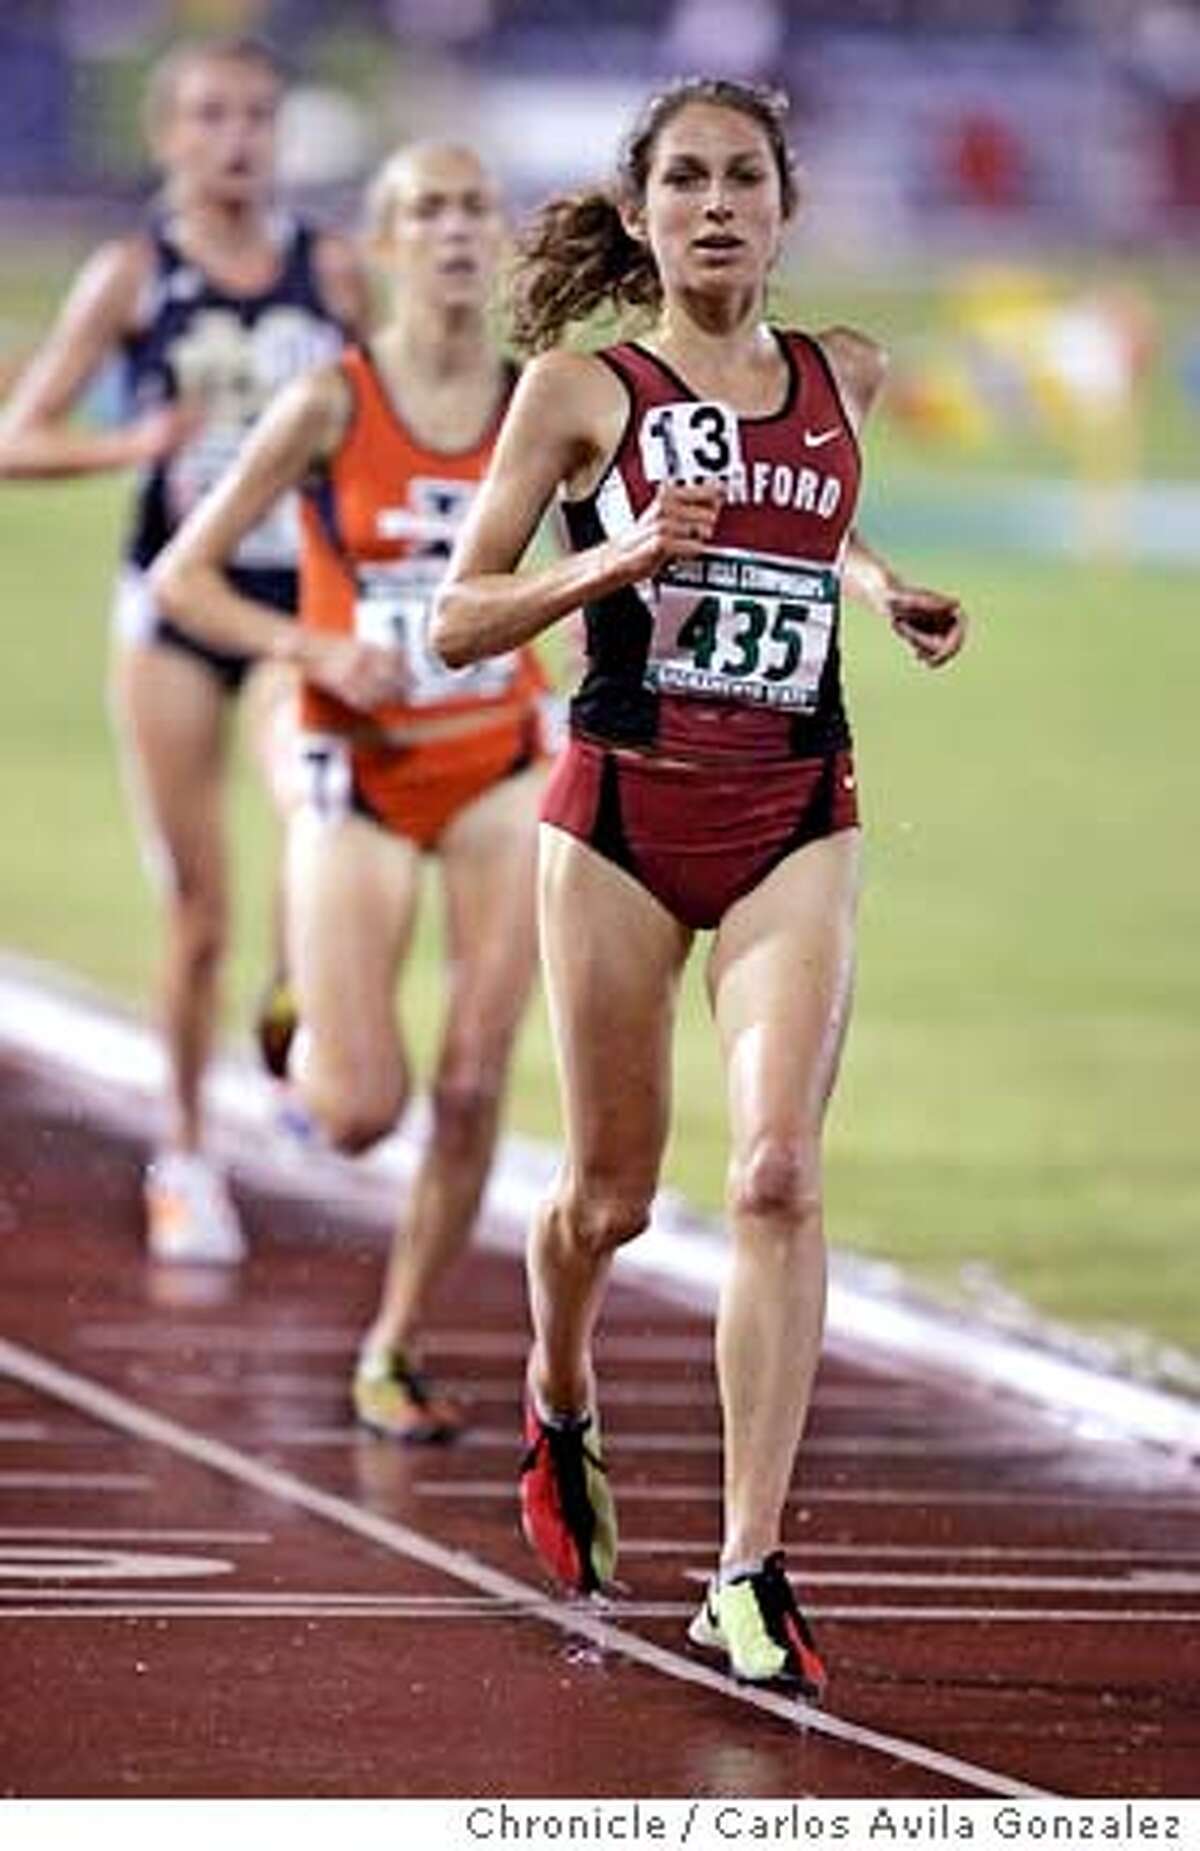 Stanford University's Sarah Bei, finishes first in the womens' 5000 meters first round during the NCAA Track and Field Finals in Sacramento, Ca., on Wednesday, June 8, 2005. Photo by Carlos Avila Gonzalez / The San Francisco Chronicle Photo taken on 6/8/05, in Sacramento,CA.